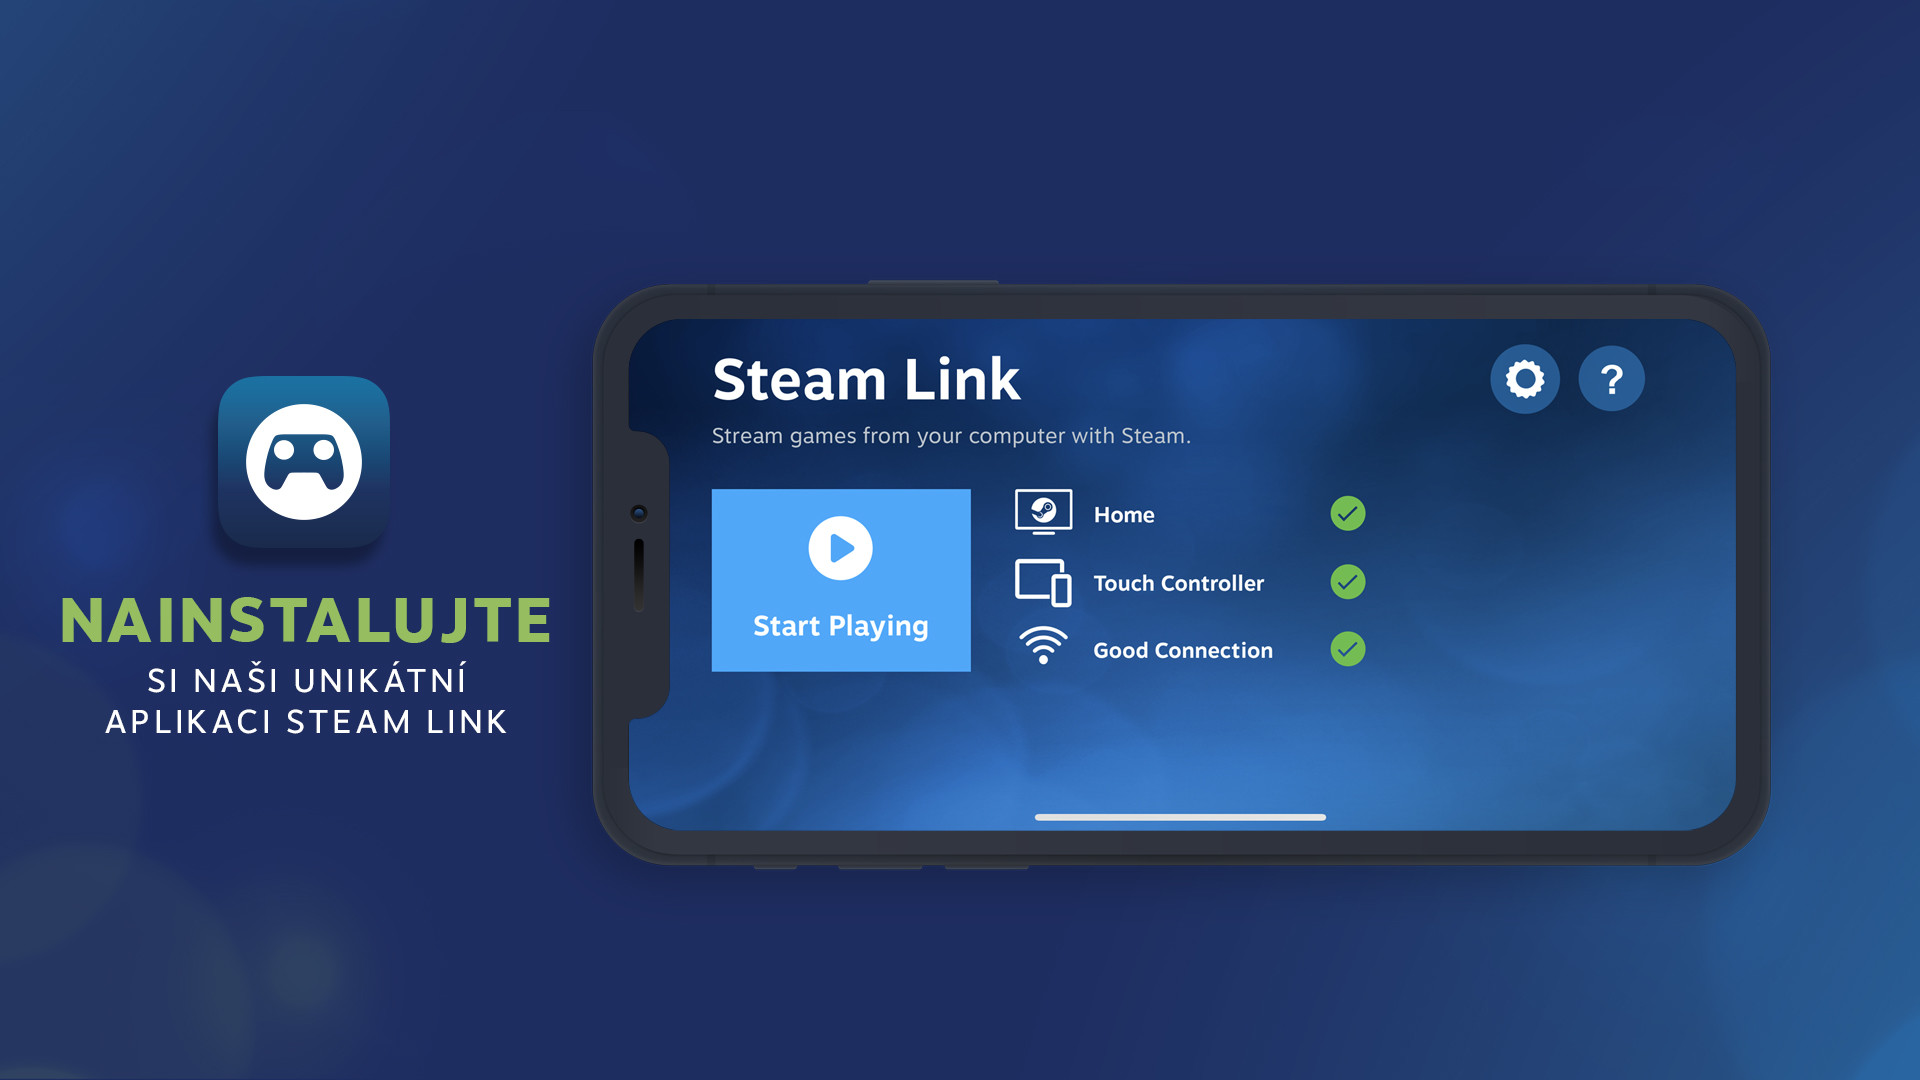 Co je to Steam Link?